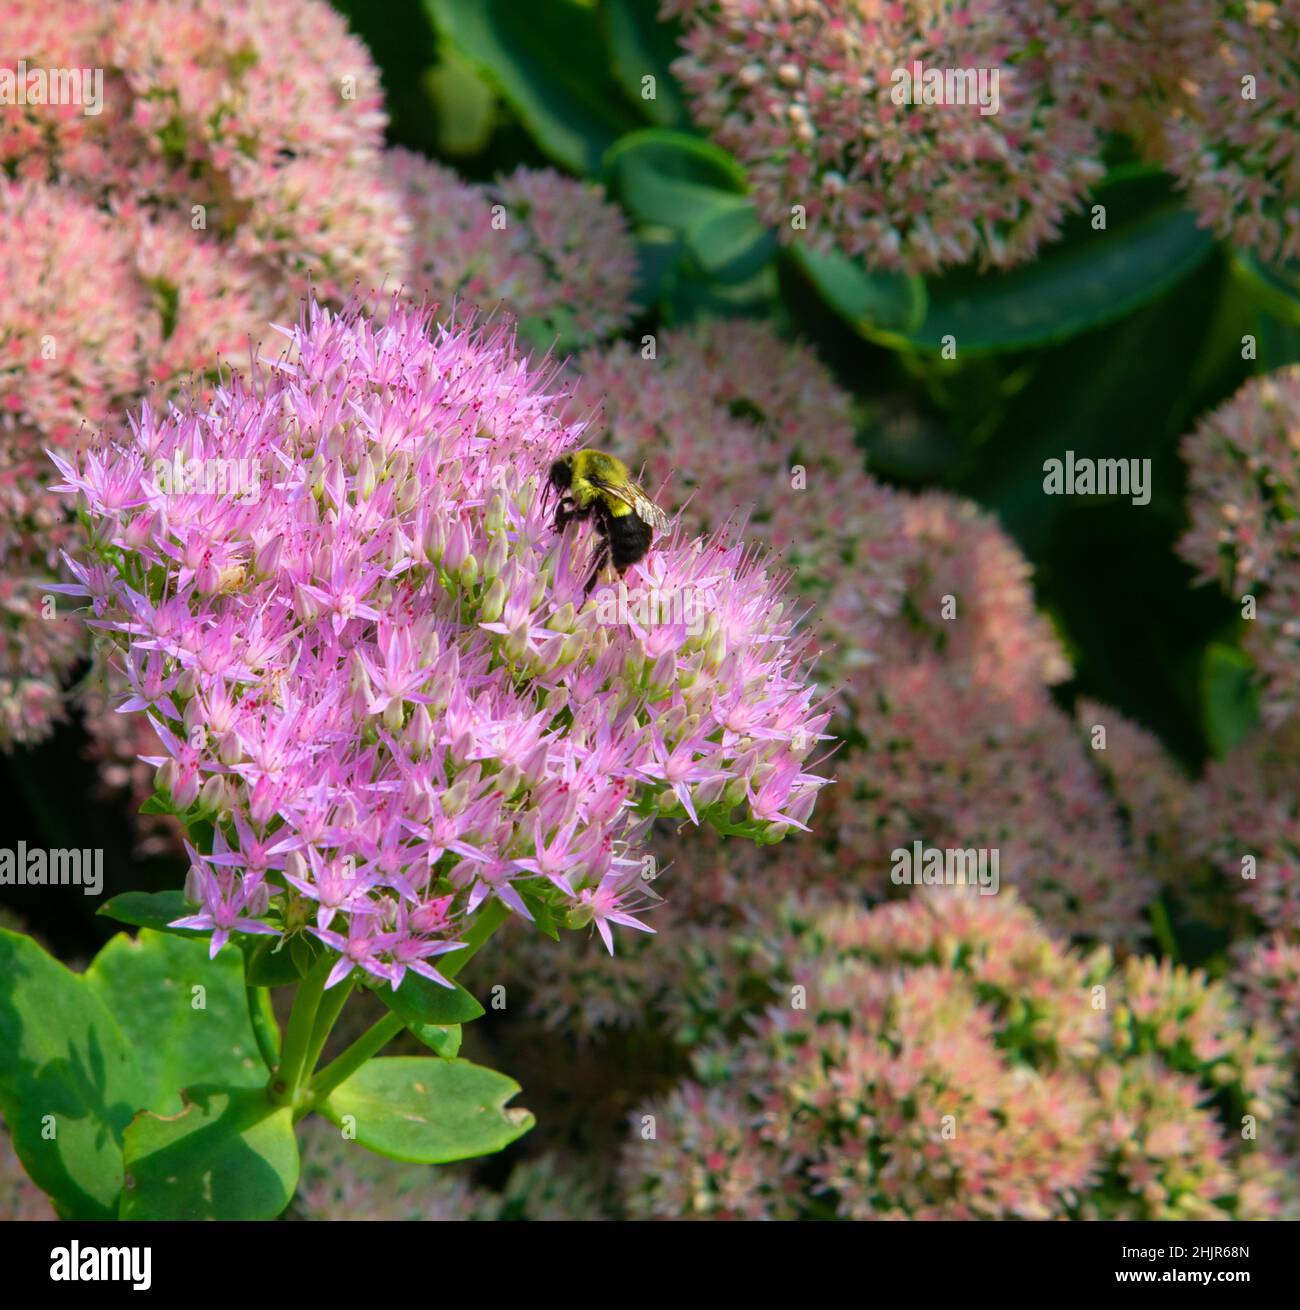 Close up of a Carpenter or Honey Bee,feeding on a purple sedum flower. Sedum flowers are commonly known as spreading stone crops or autumn joy. Stock Photo